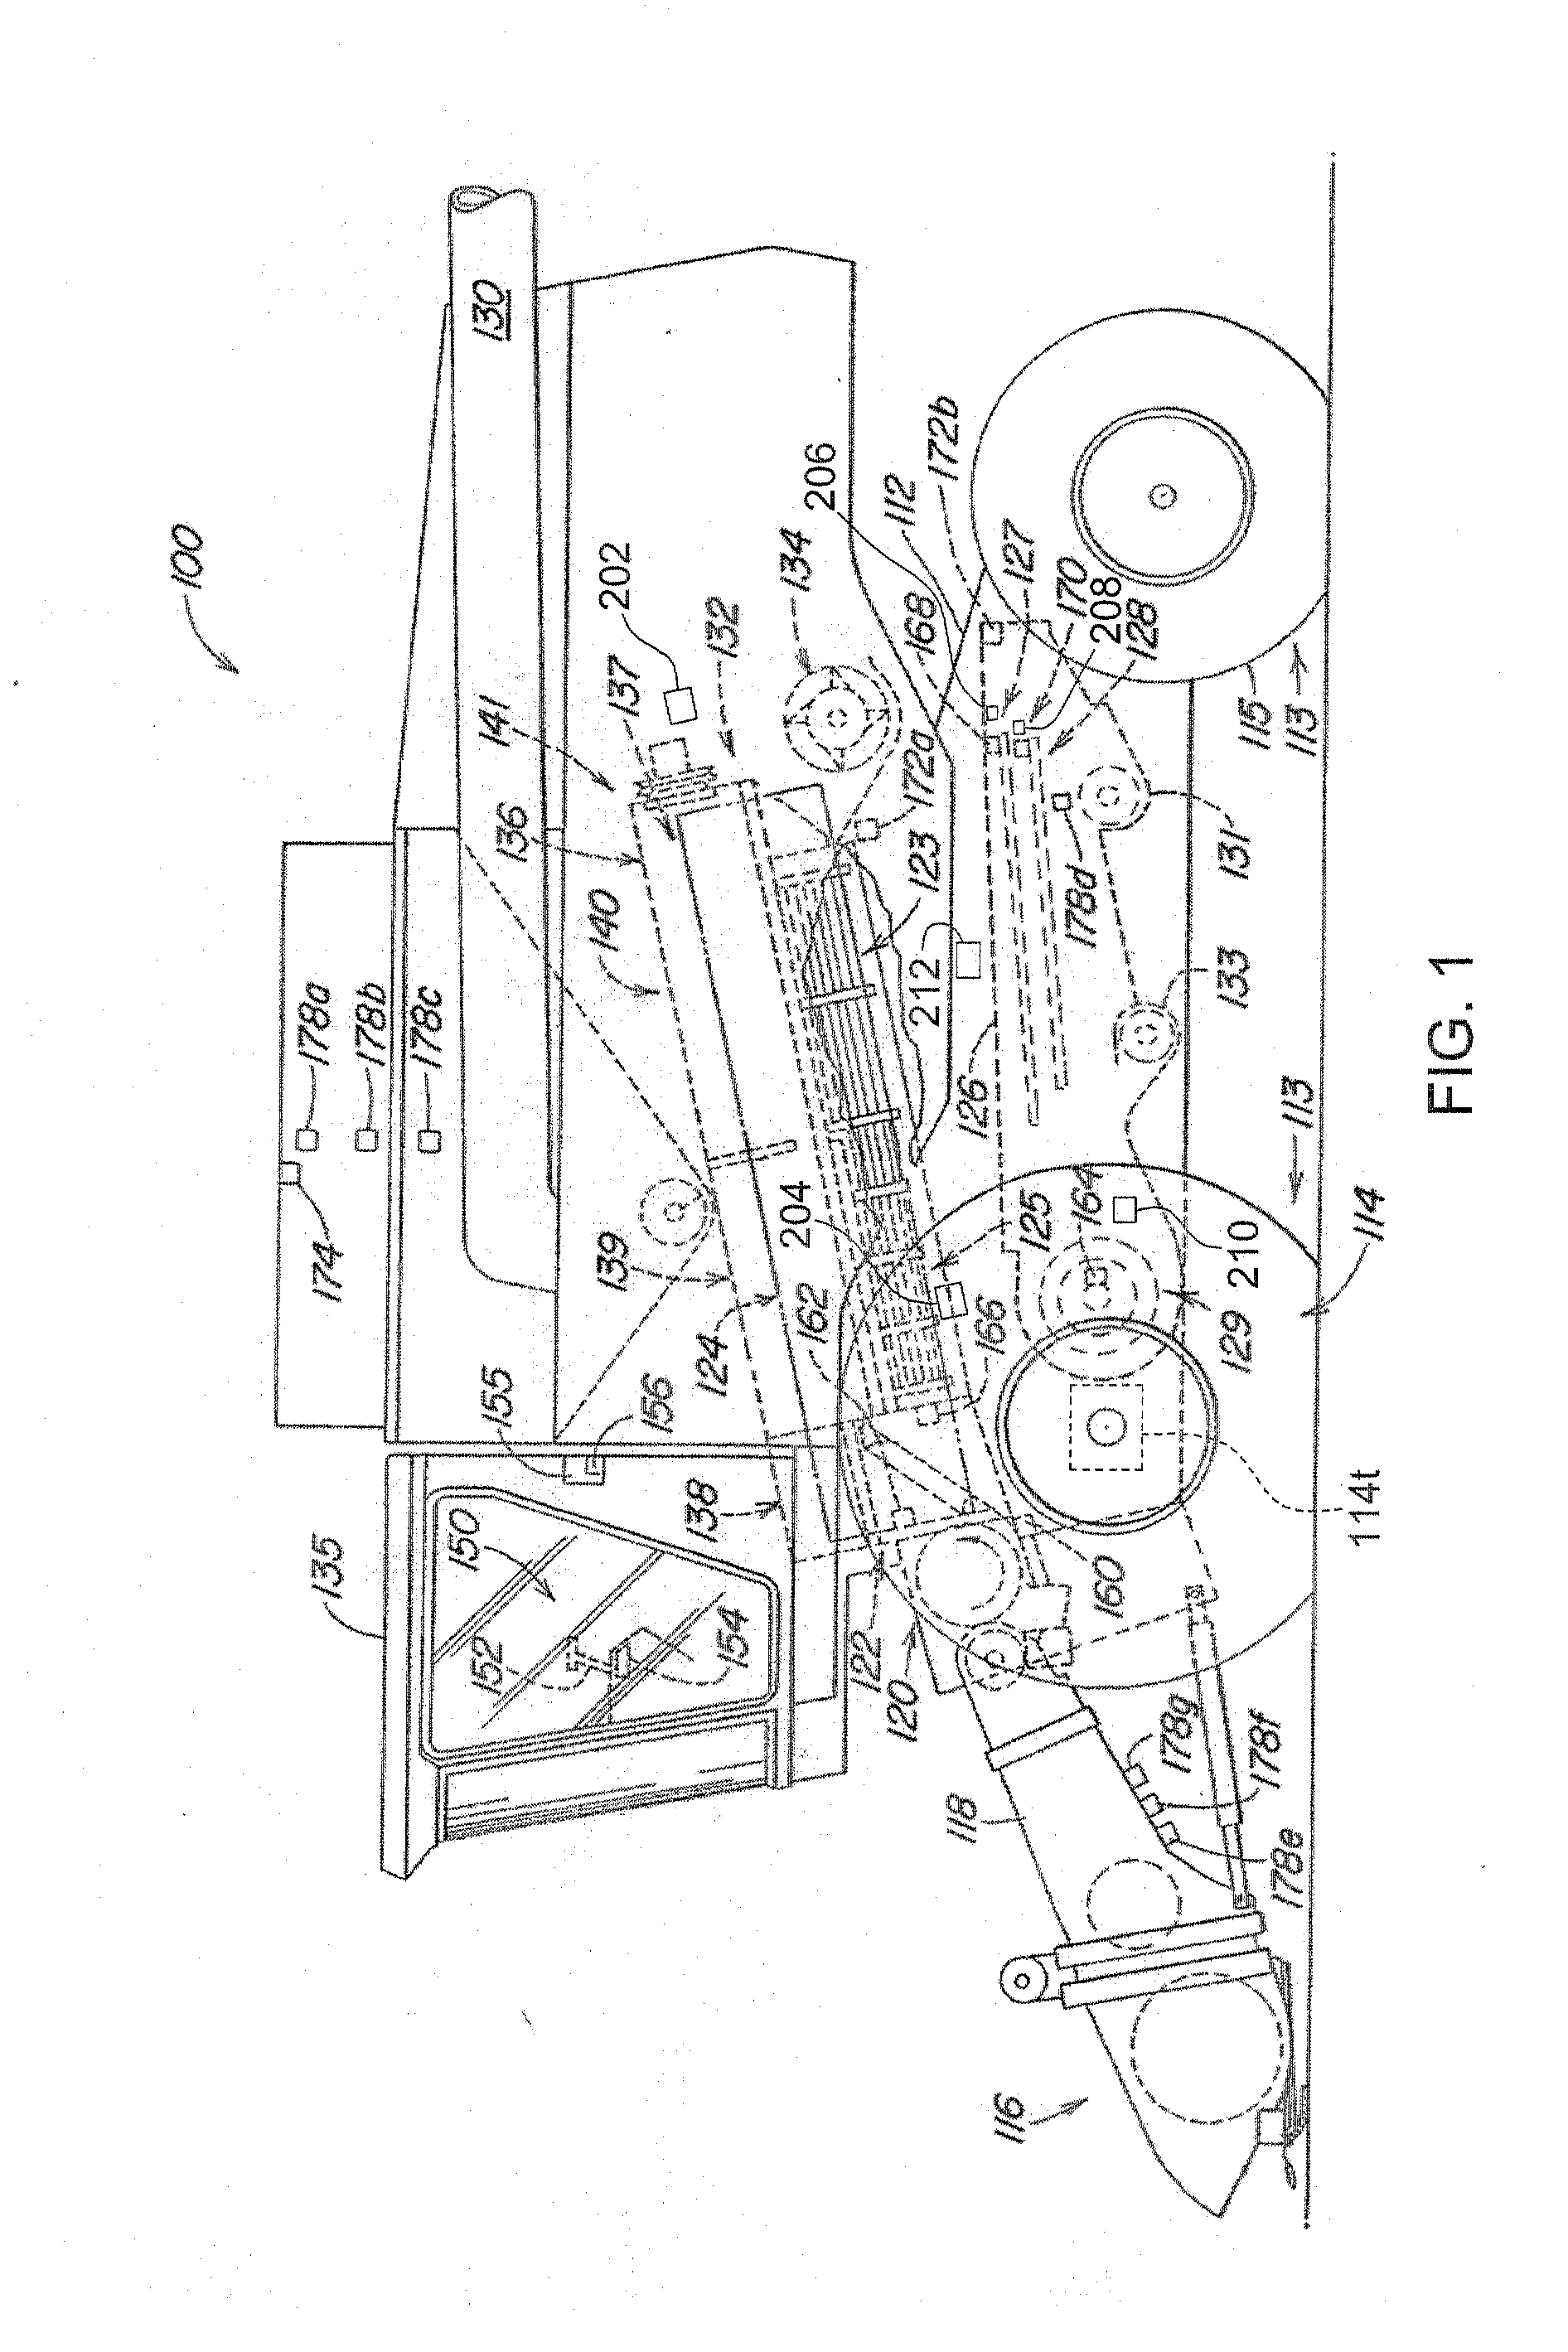 Operating state detection system for work machine with fusion considering sensor value reliabilty